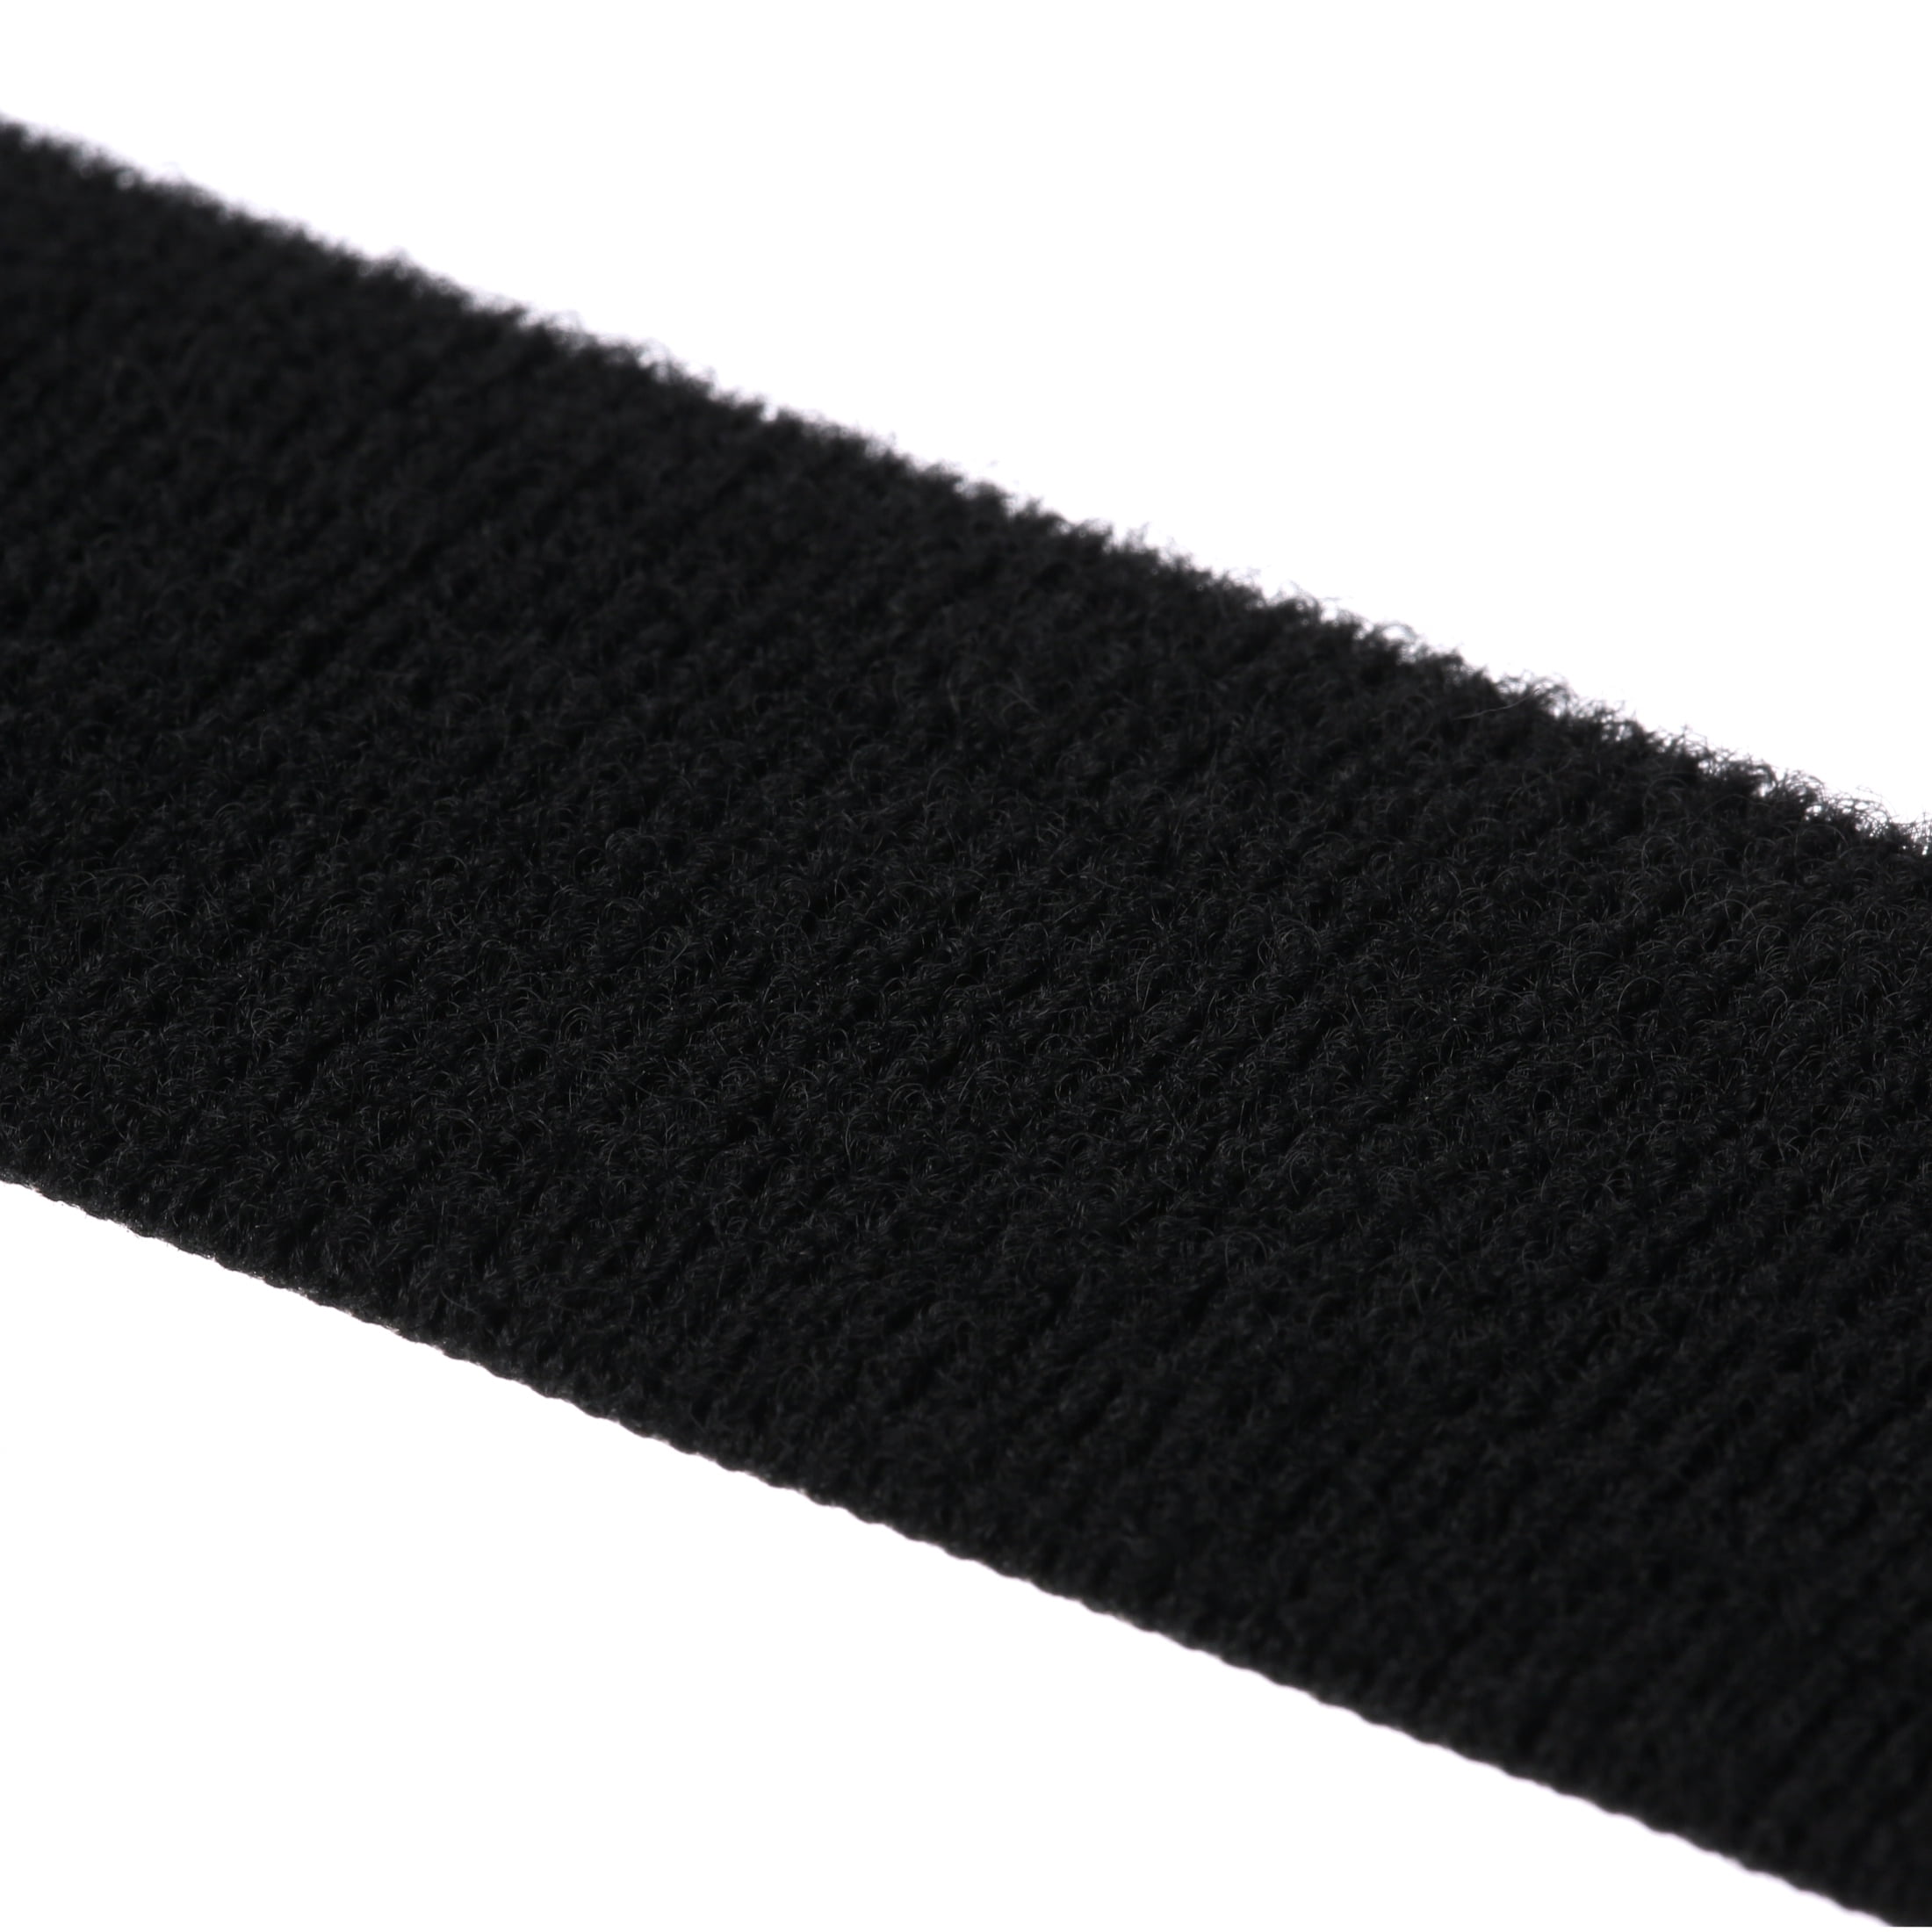 VELCRO® Brand Reusable ONE-WRAP® Tape Strap Dbl Sided 1.5 x12ft. (4yards)  Black 